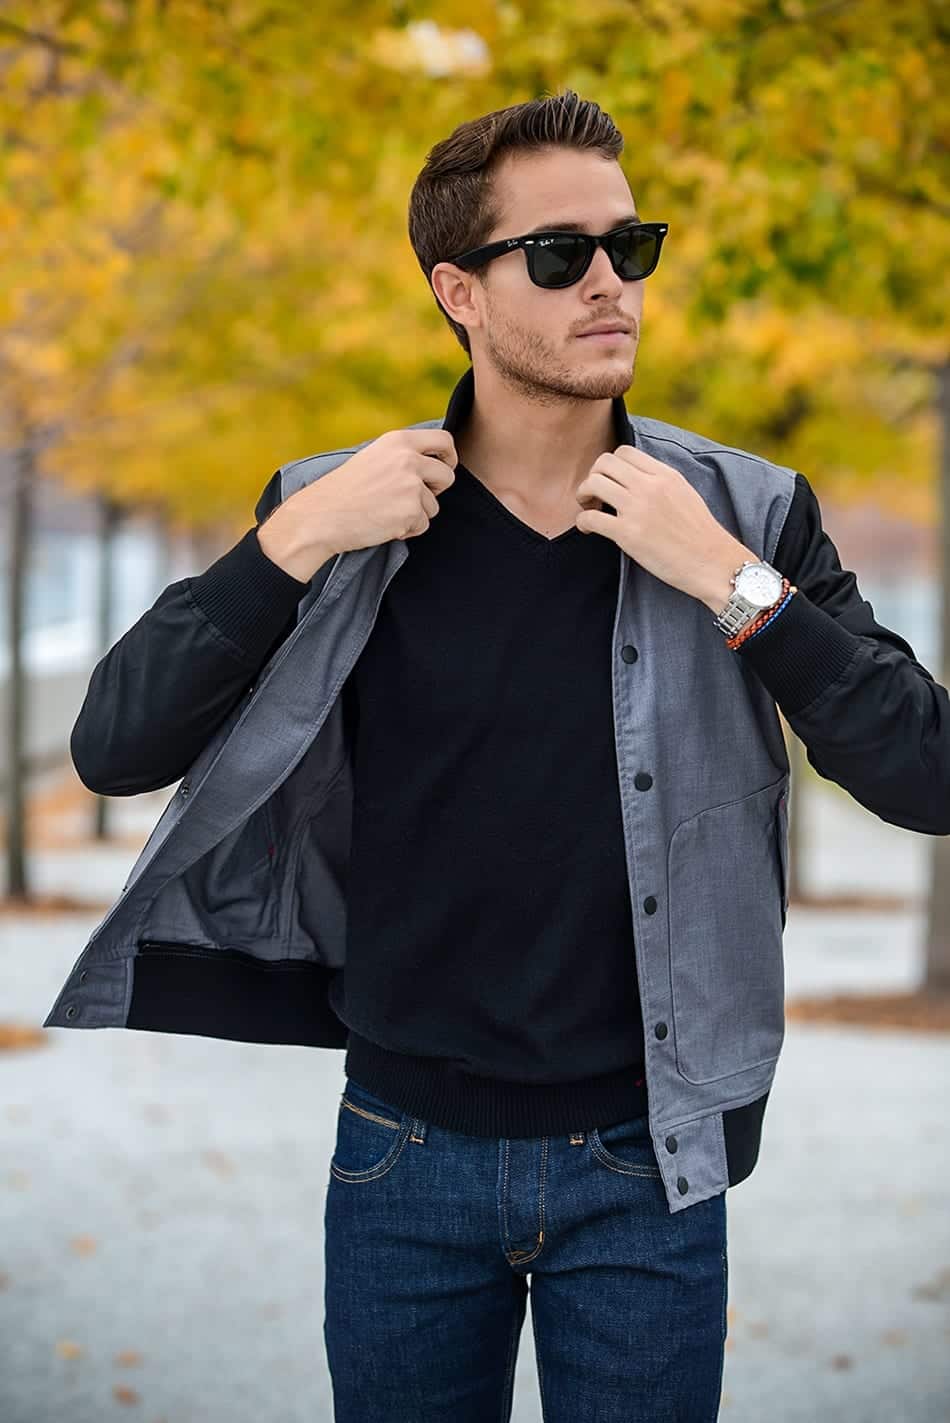 Outfit for Men | outfit-inspirations.pages.dev